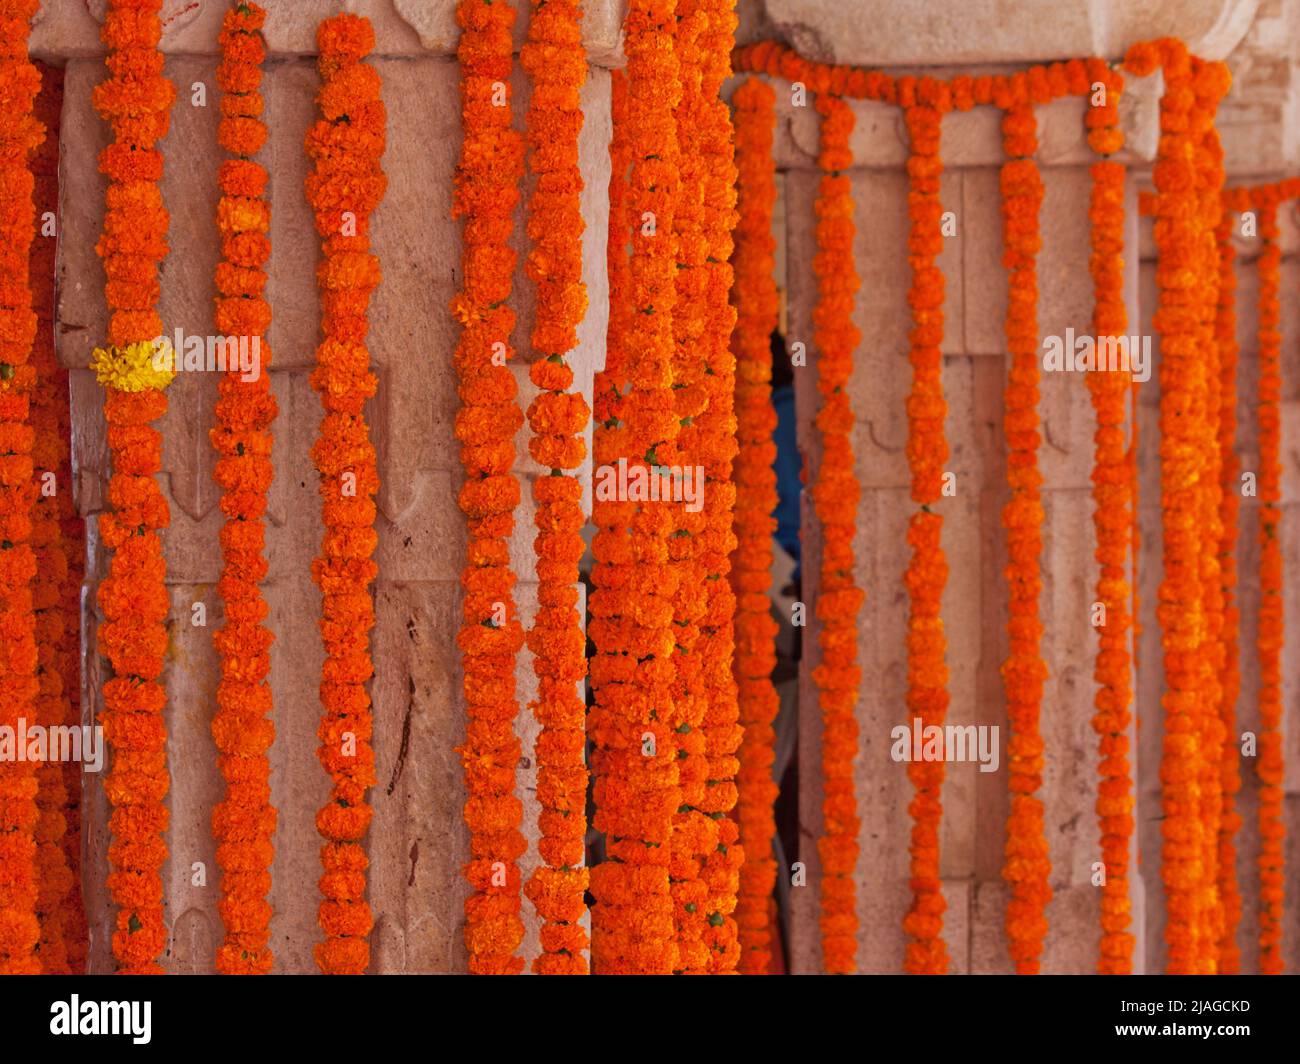 Decorations consisting of strung marigold flower heads at a Hindu wedding celebration Stock Photo